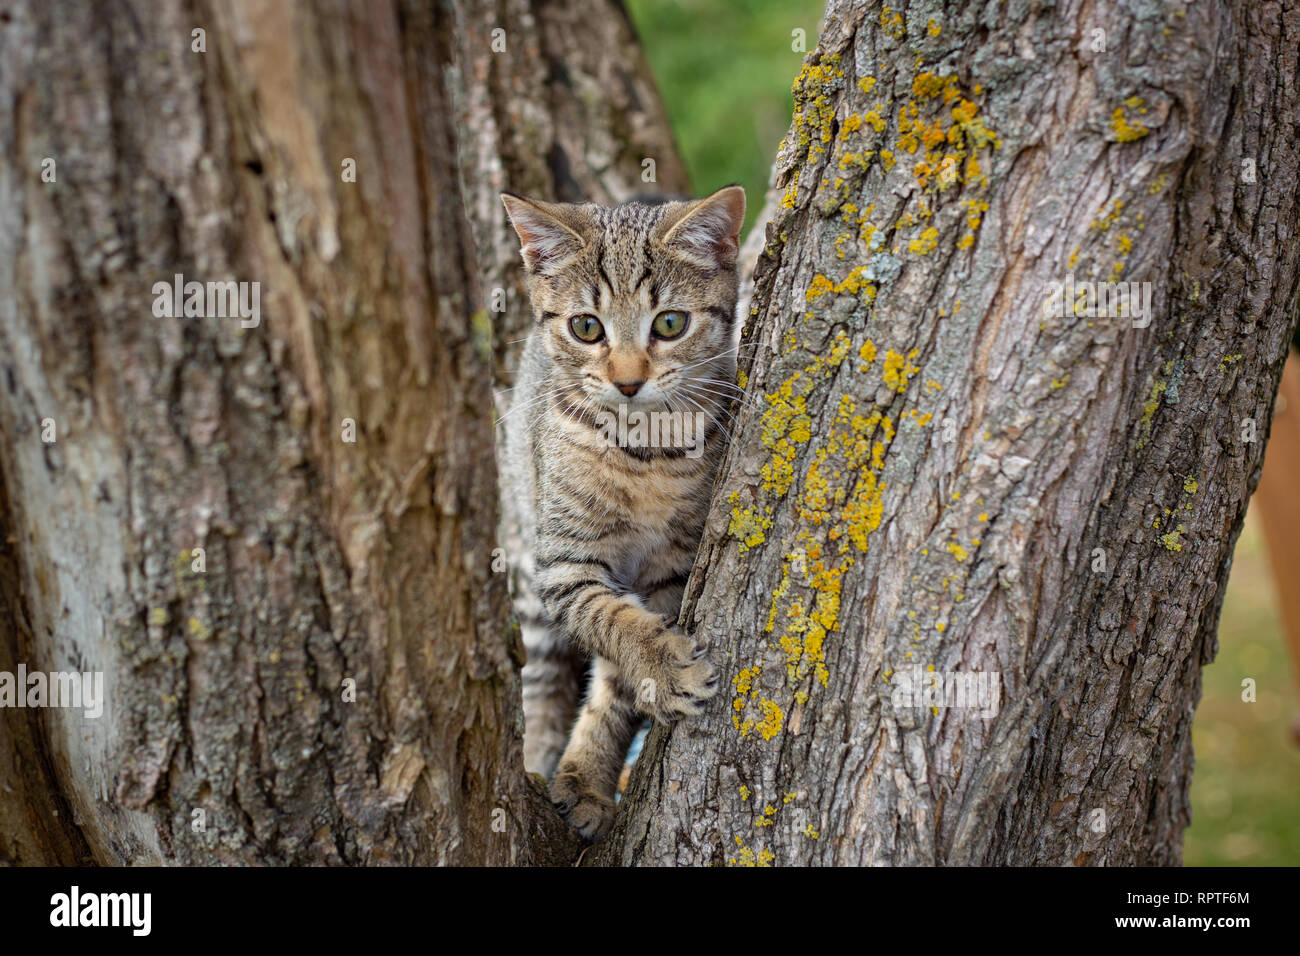 A tabby kitten loves playing in a tree and clawing at the bark on the tree trunk Stock Photo